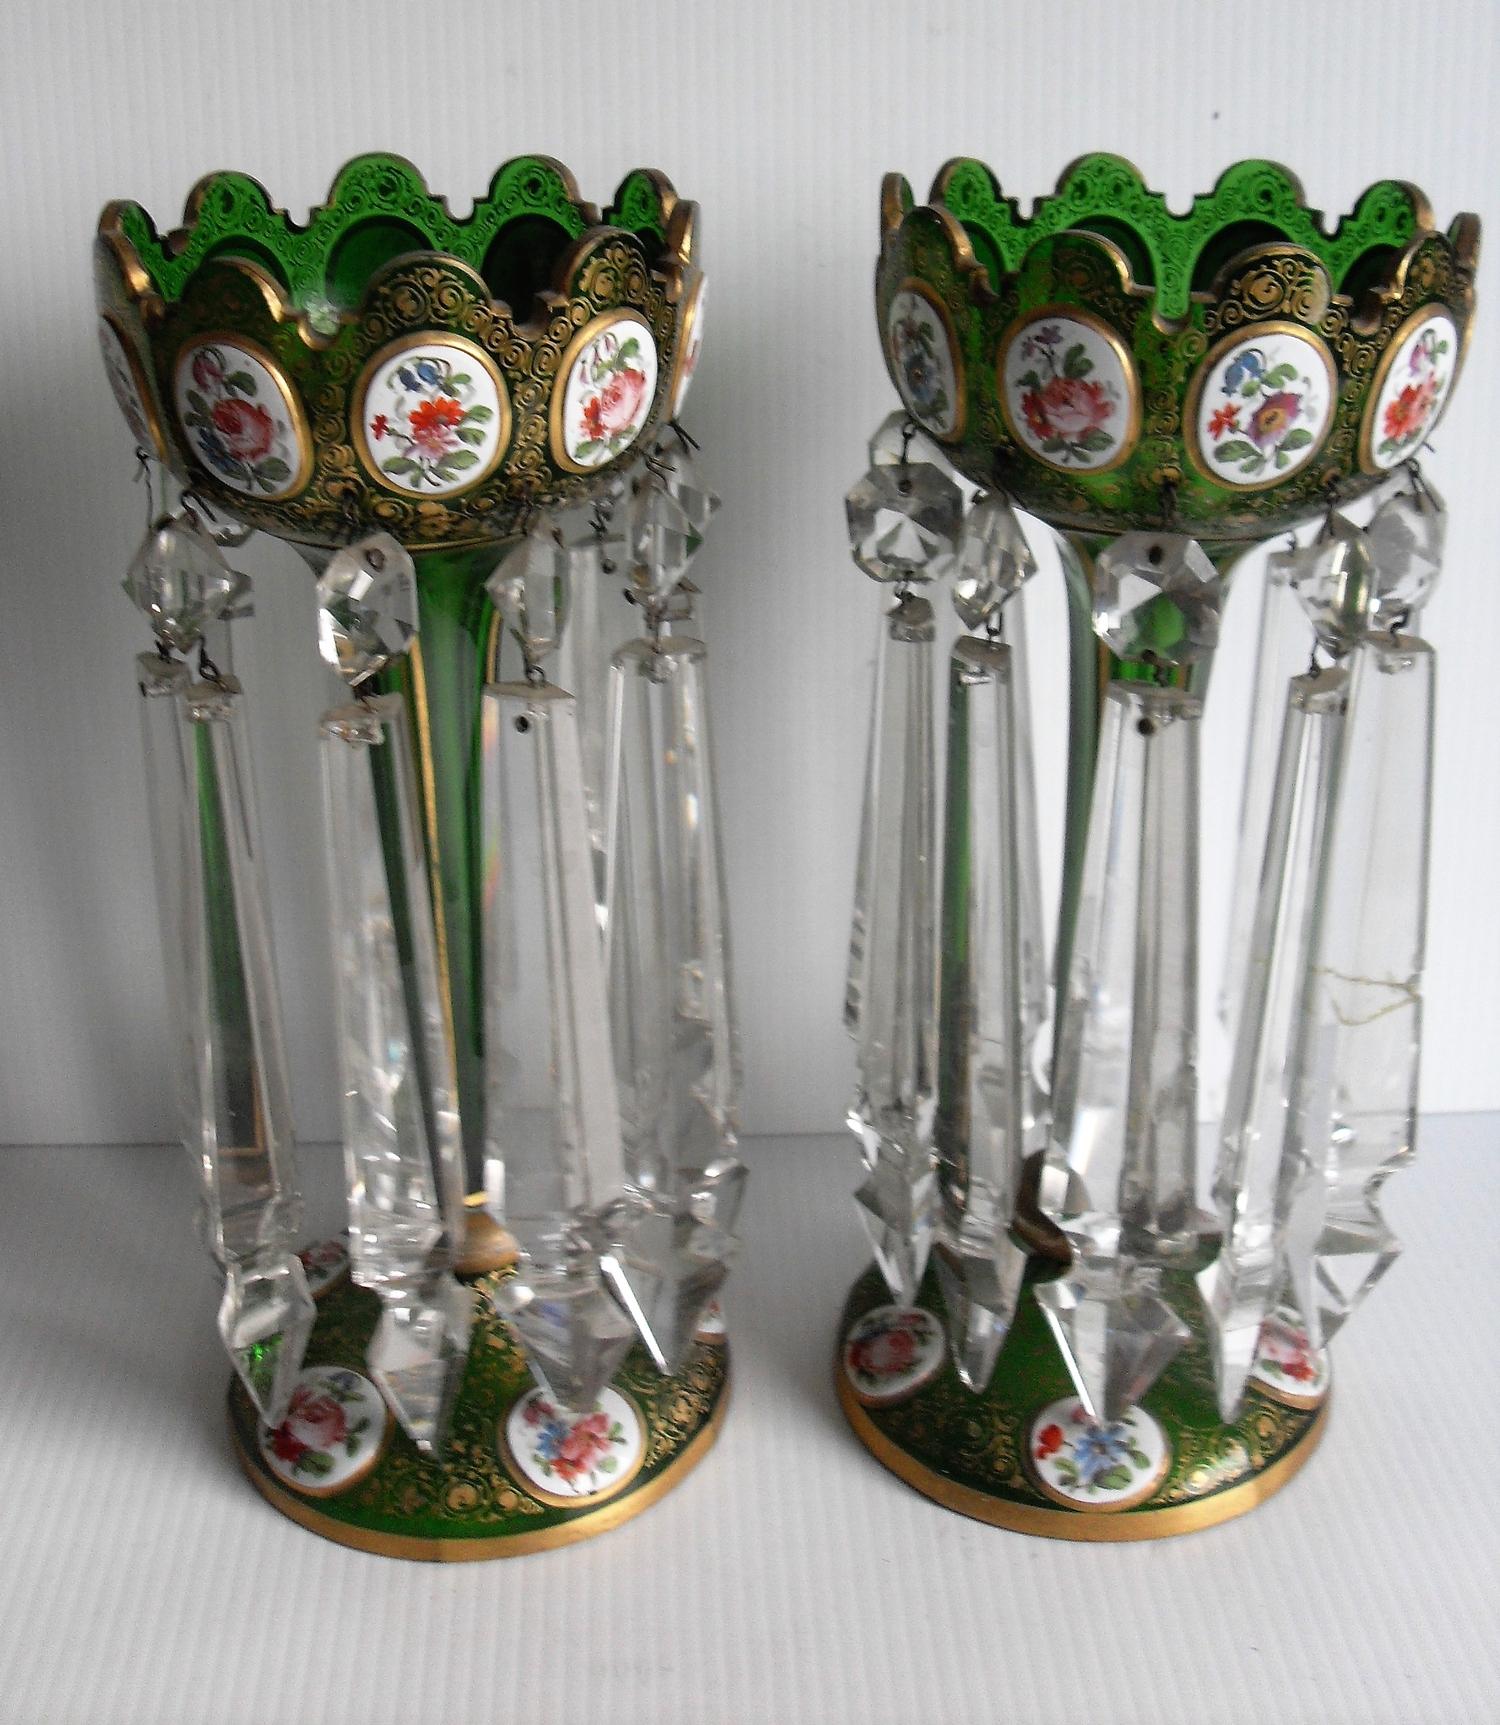 A pair of 19th century Bohemian overlaid green glass lustre vases decorated with oval medallions